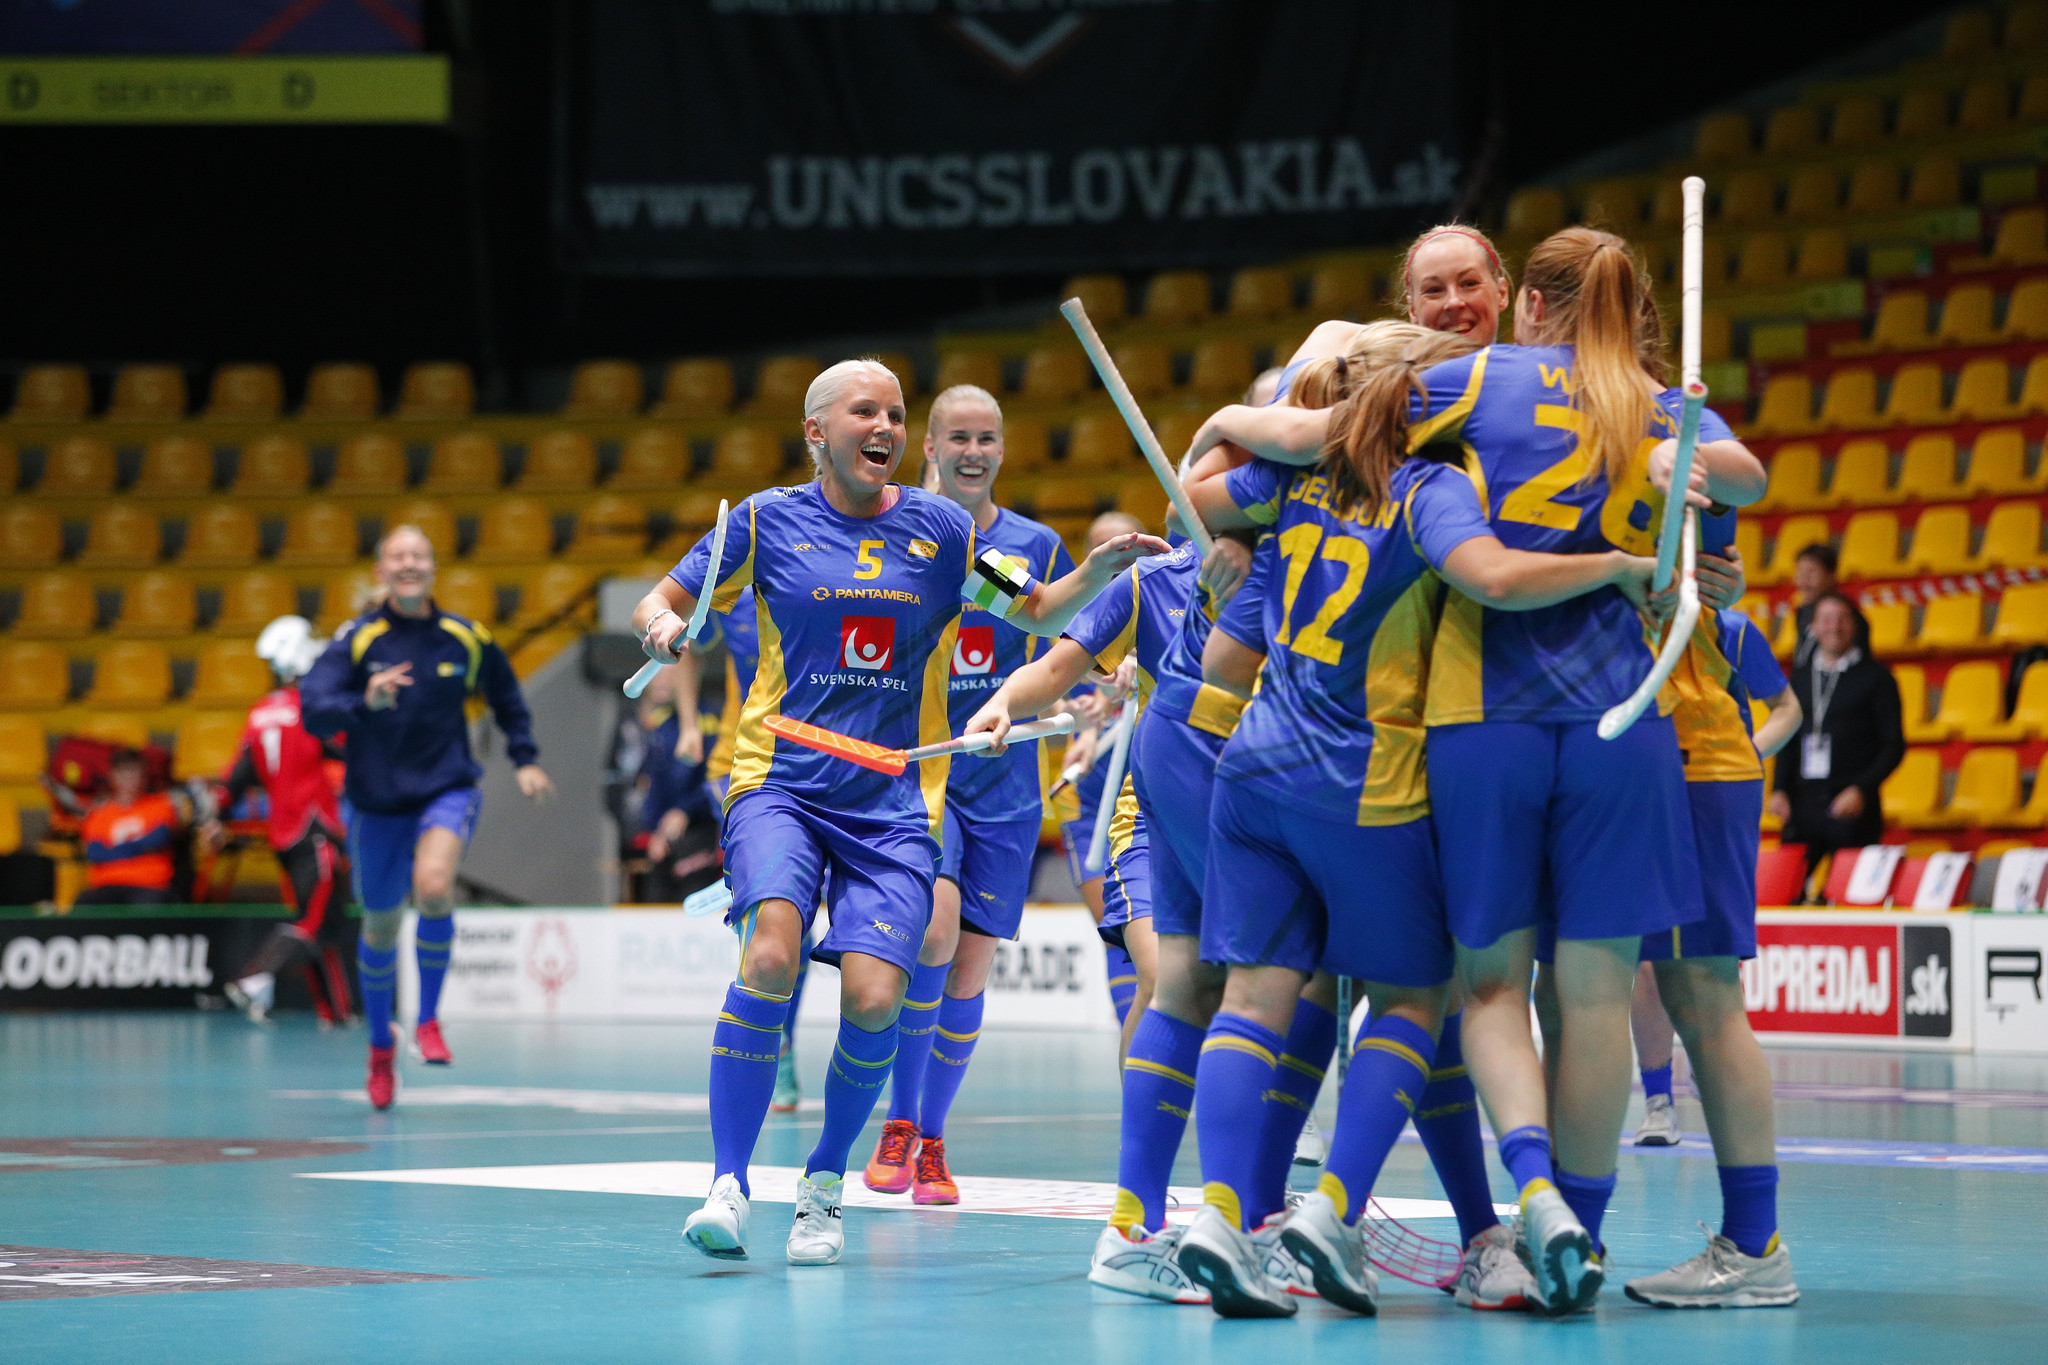 Sweden once again showed why their the favourites for the Women's World Floorball Championship title after thrashing Switzerland ©IFF